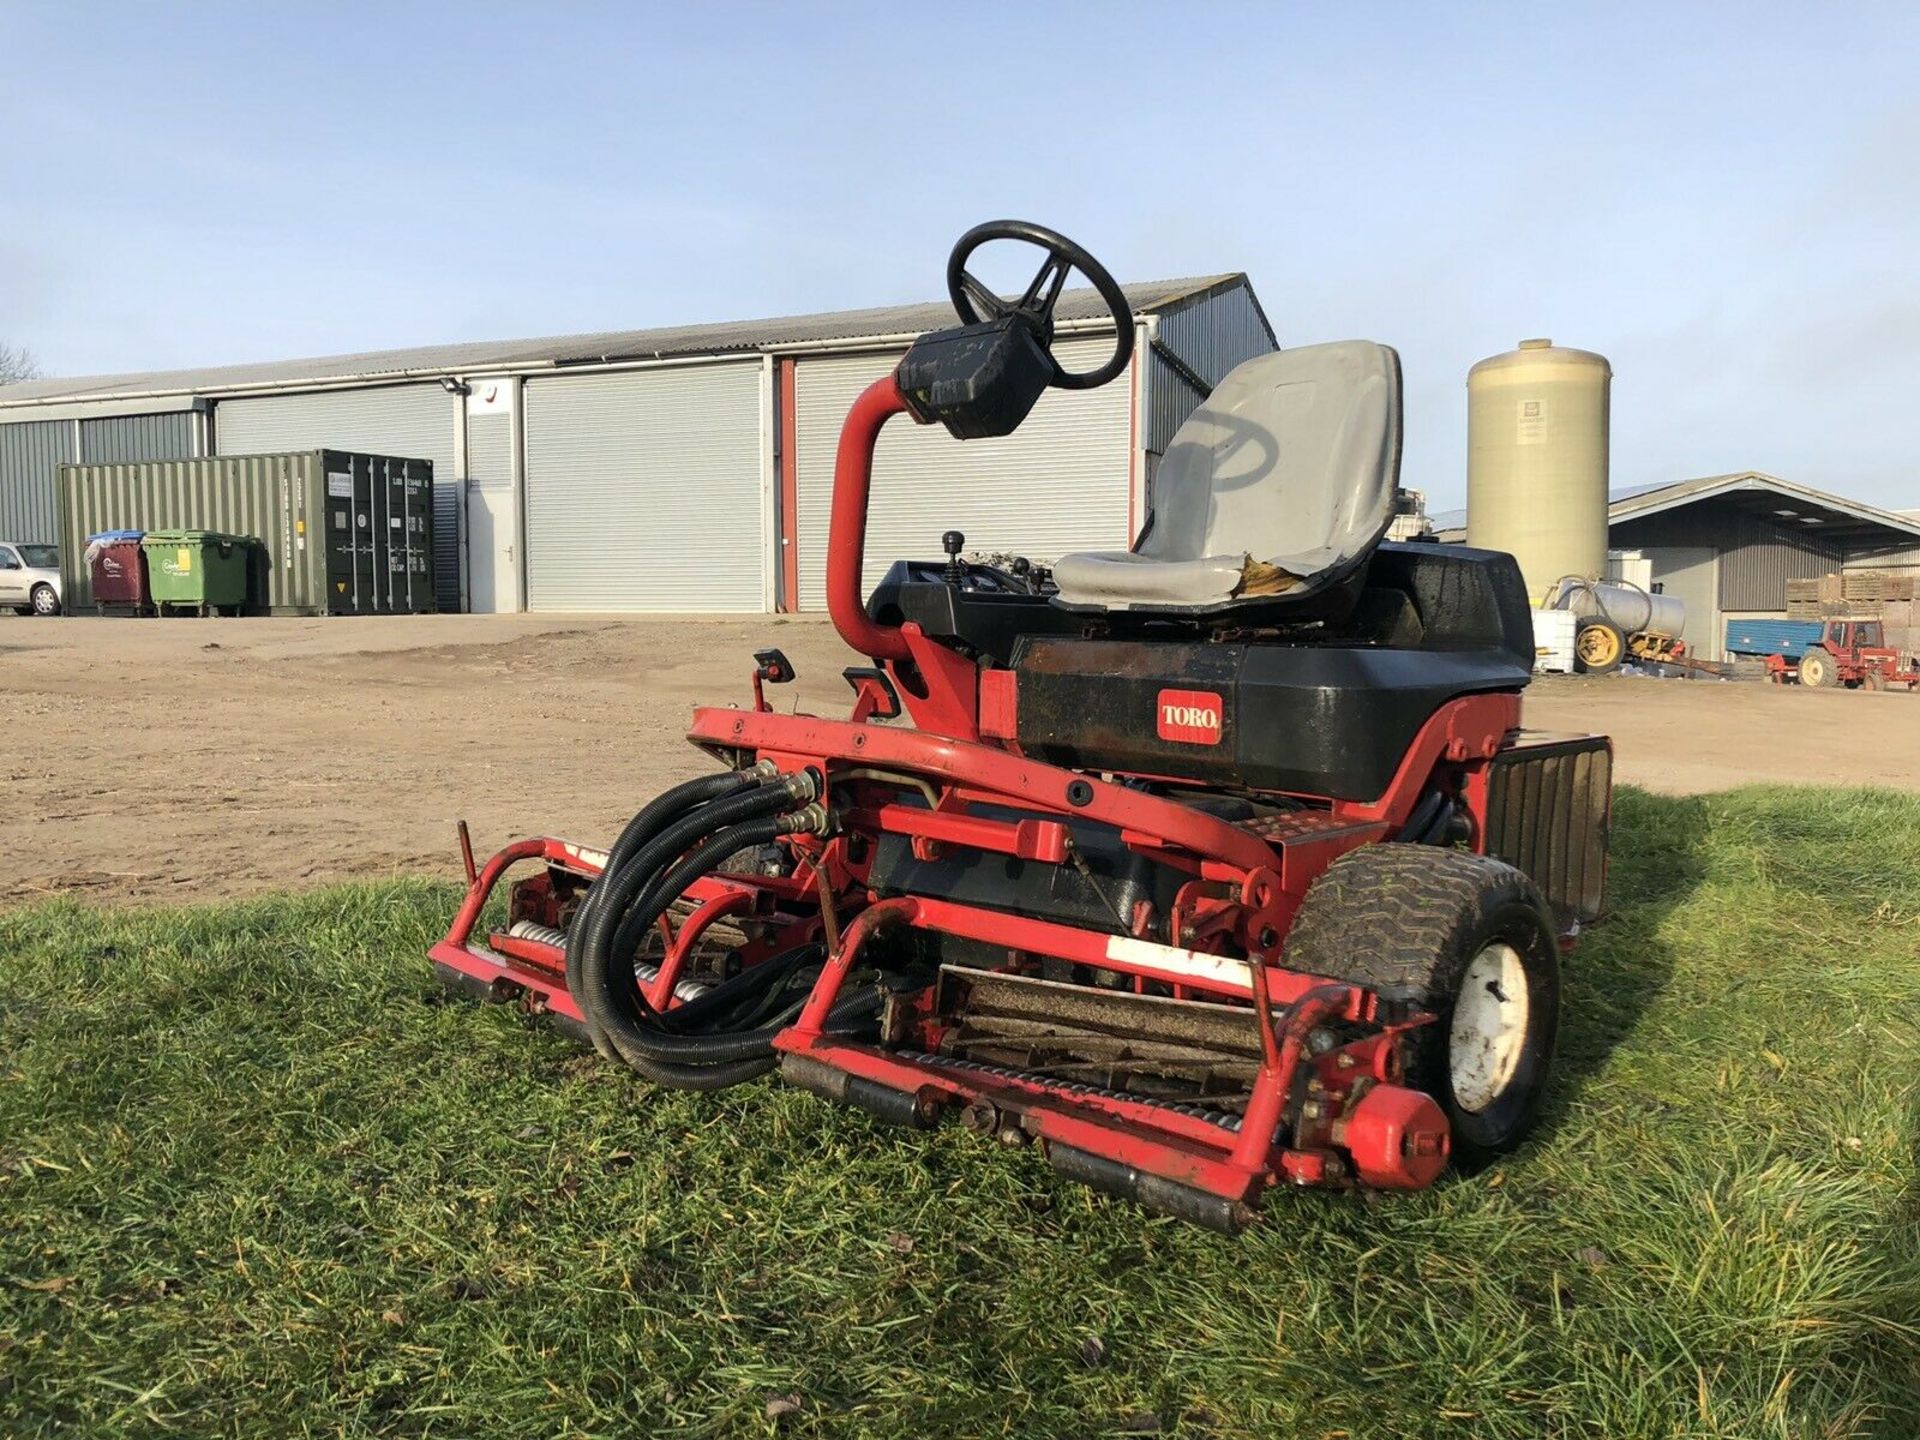 TORO 3200 DIESEL RIDE ON LAWN MOWER, HYDROSTATIC DRIVE, VERY SHARP TURNING CIRCLE, COLLECTION BOXES - Image 5 of 5